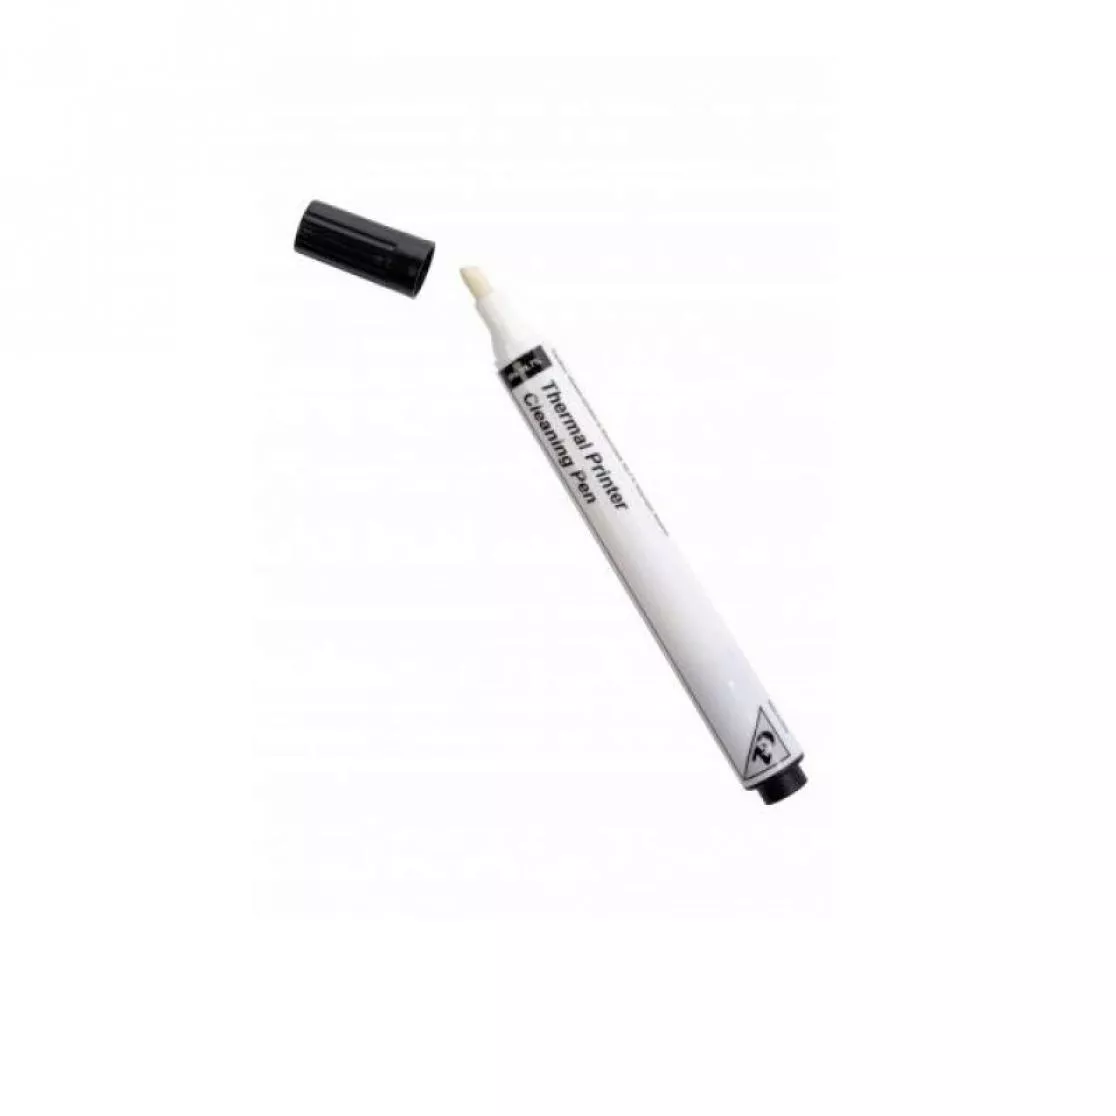 Cleaning Pen for Authentys card printers